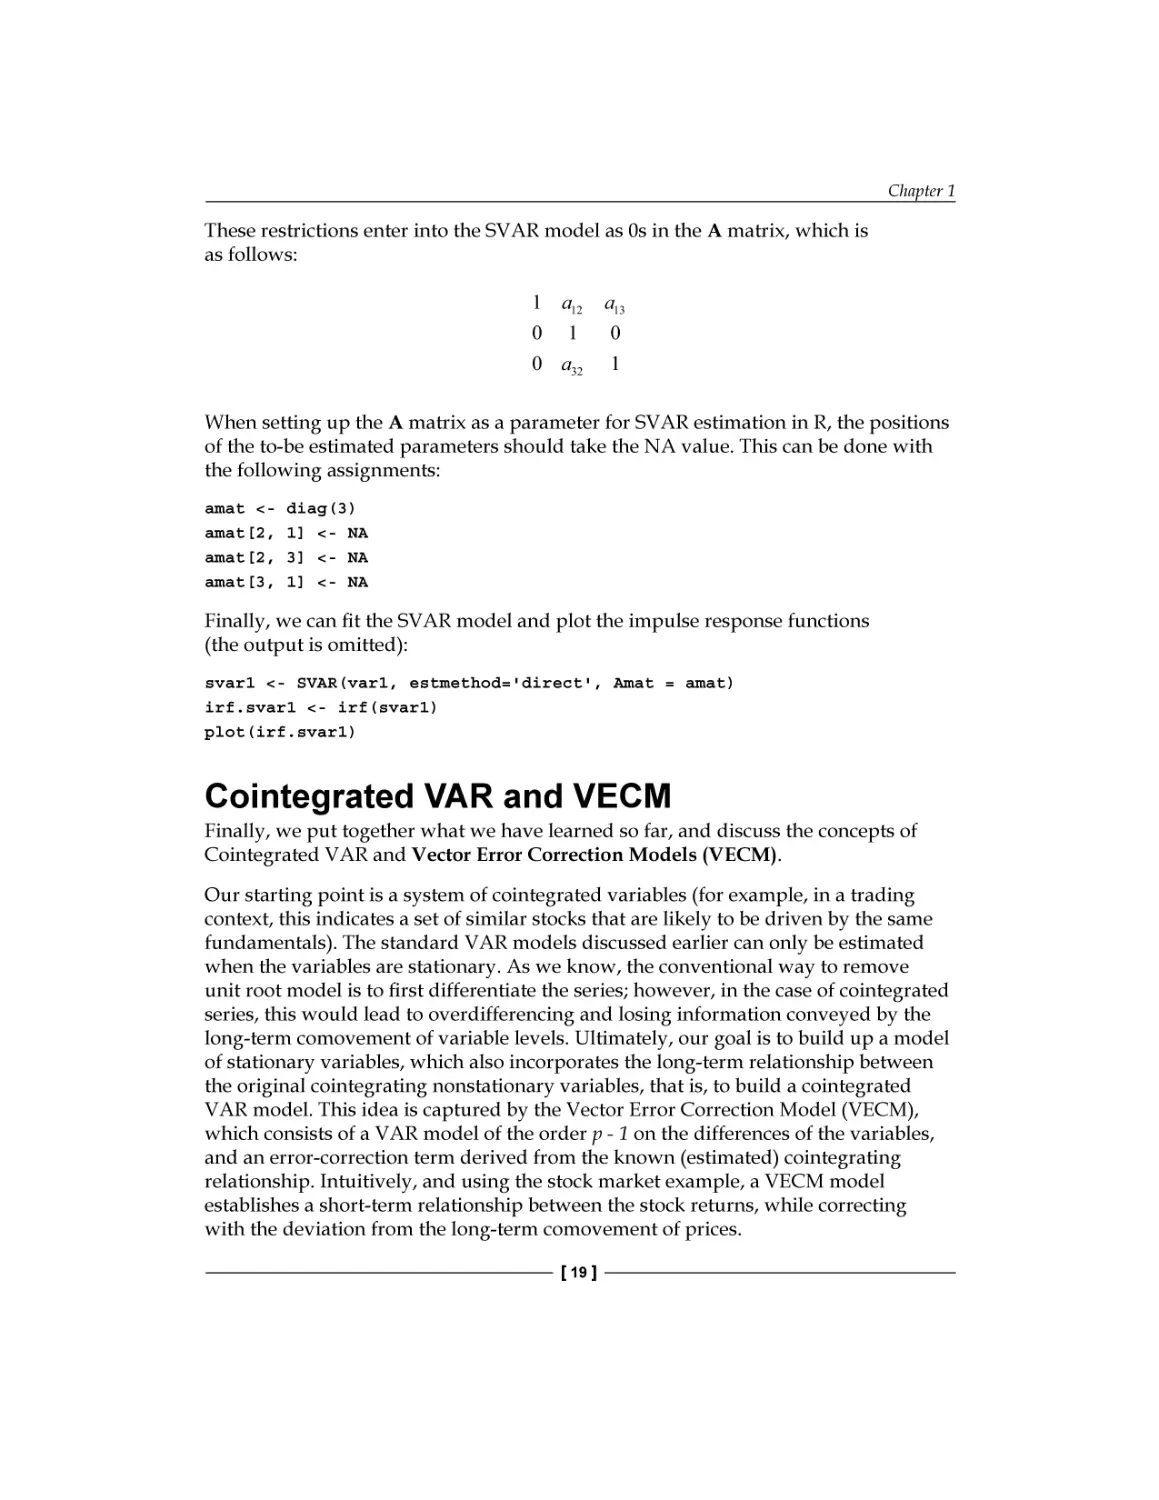 Cointegrated VAR and VECM